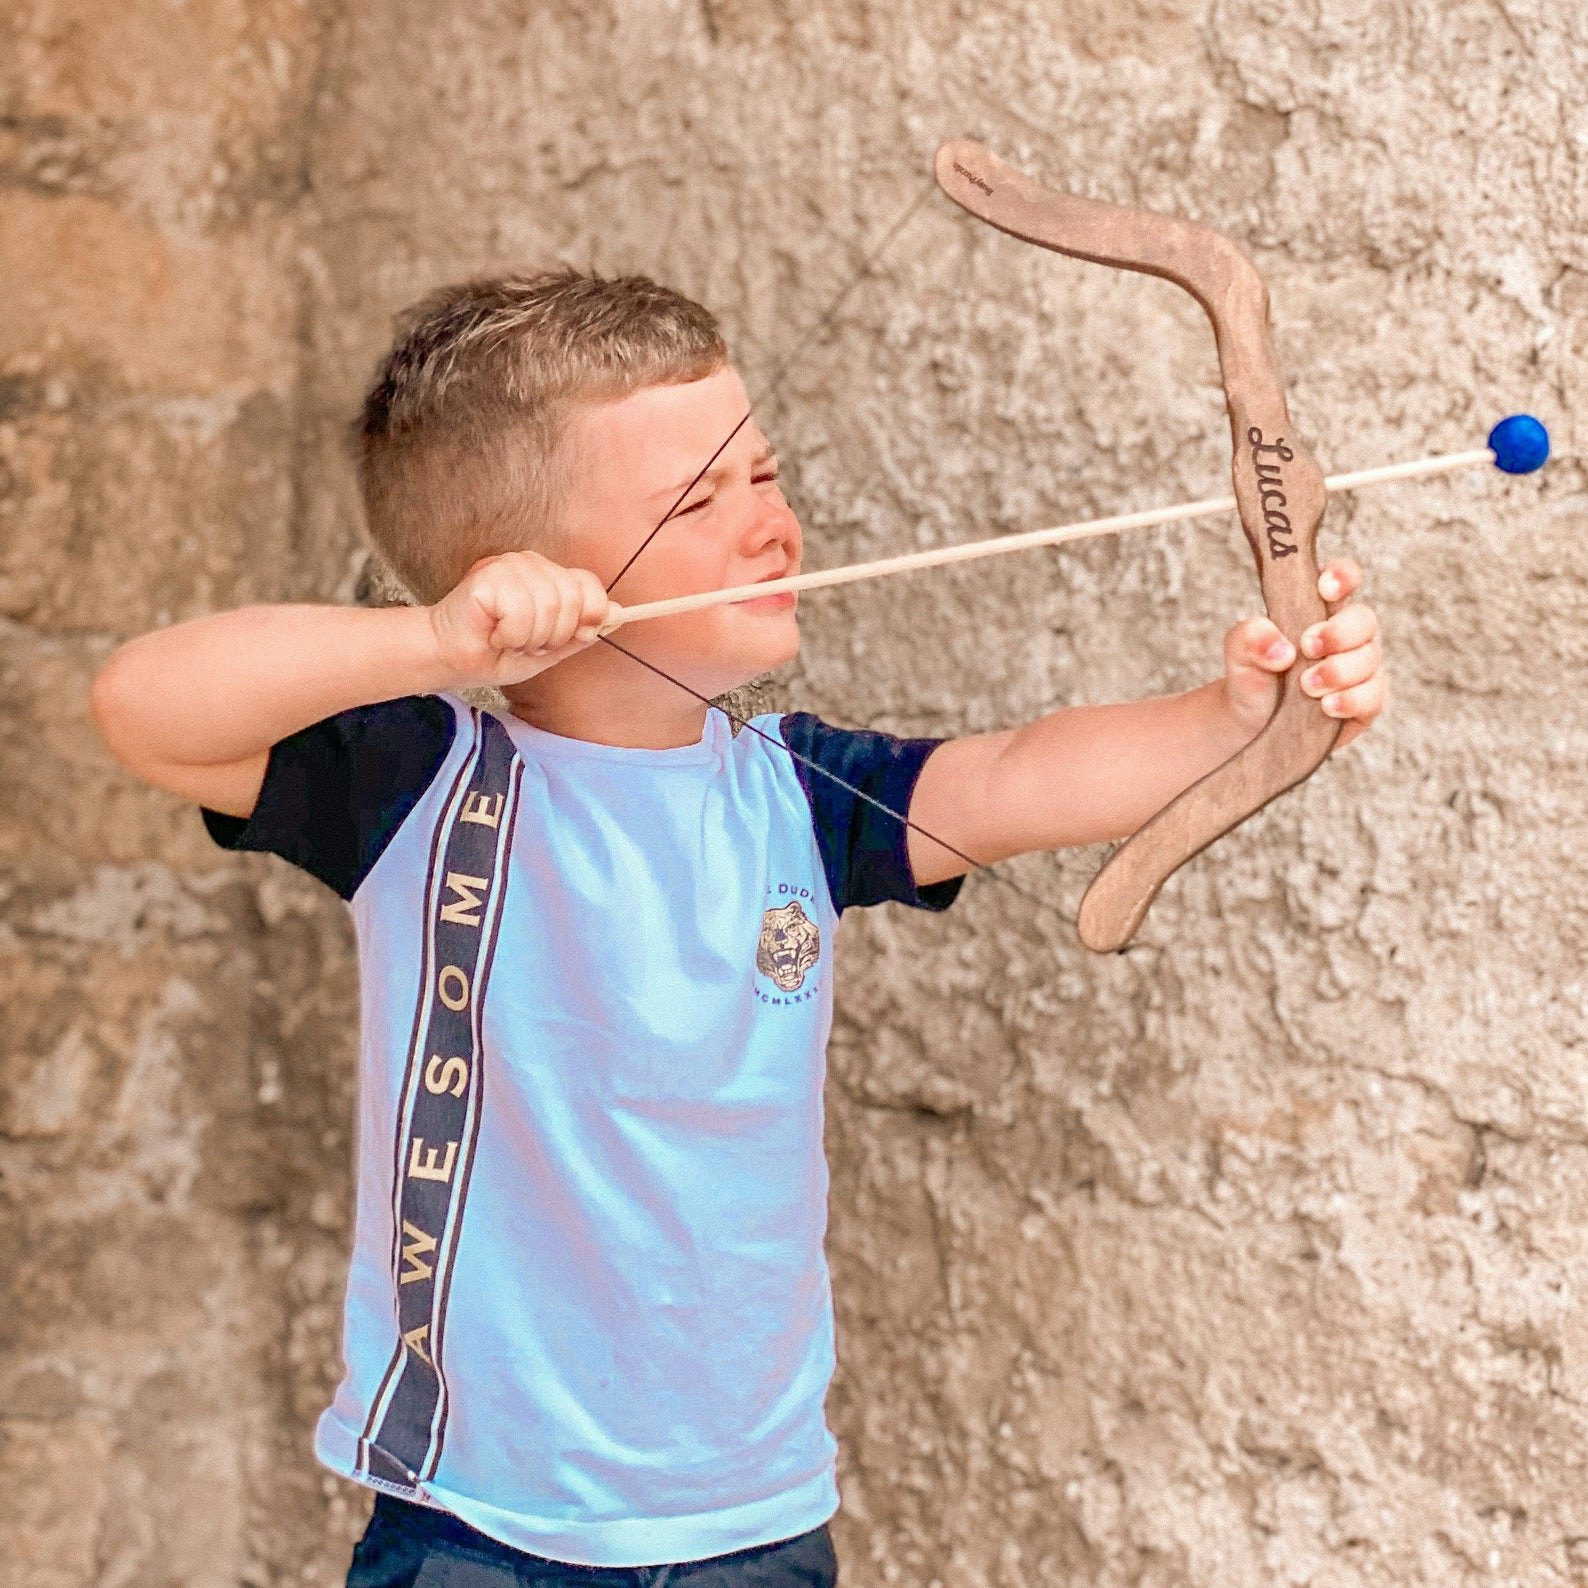 Kiddie Play Toy Archery Set for Kids with Target and Bow and Arrow 